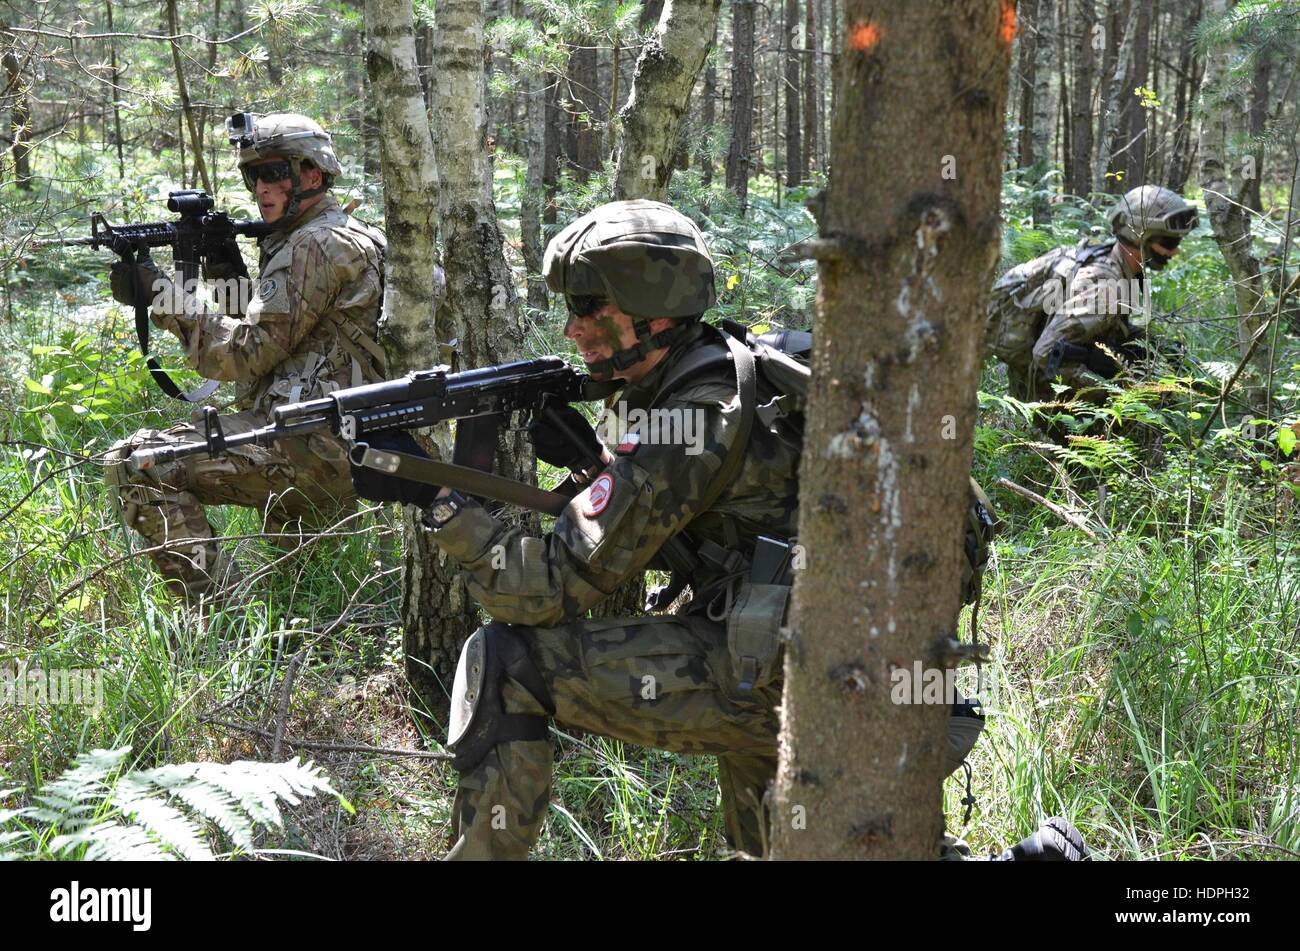 U.S. and Polish soldiers patrol from behind trees in the woods during an Operation Atlantic Resolve training exercise July 17, 2015 in Nowa Deba, Poland. Stock Photo